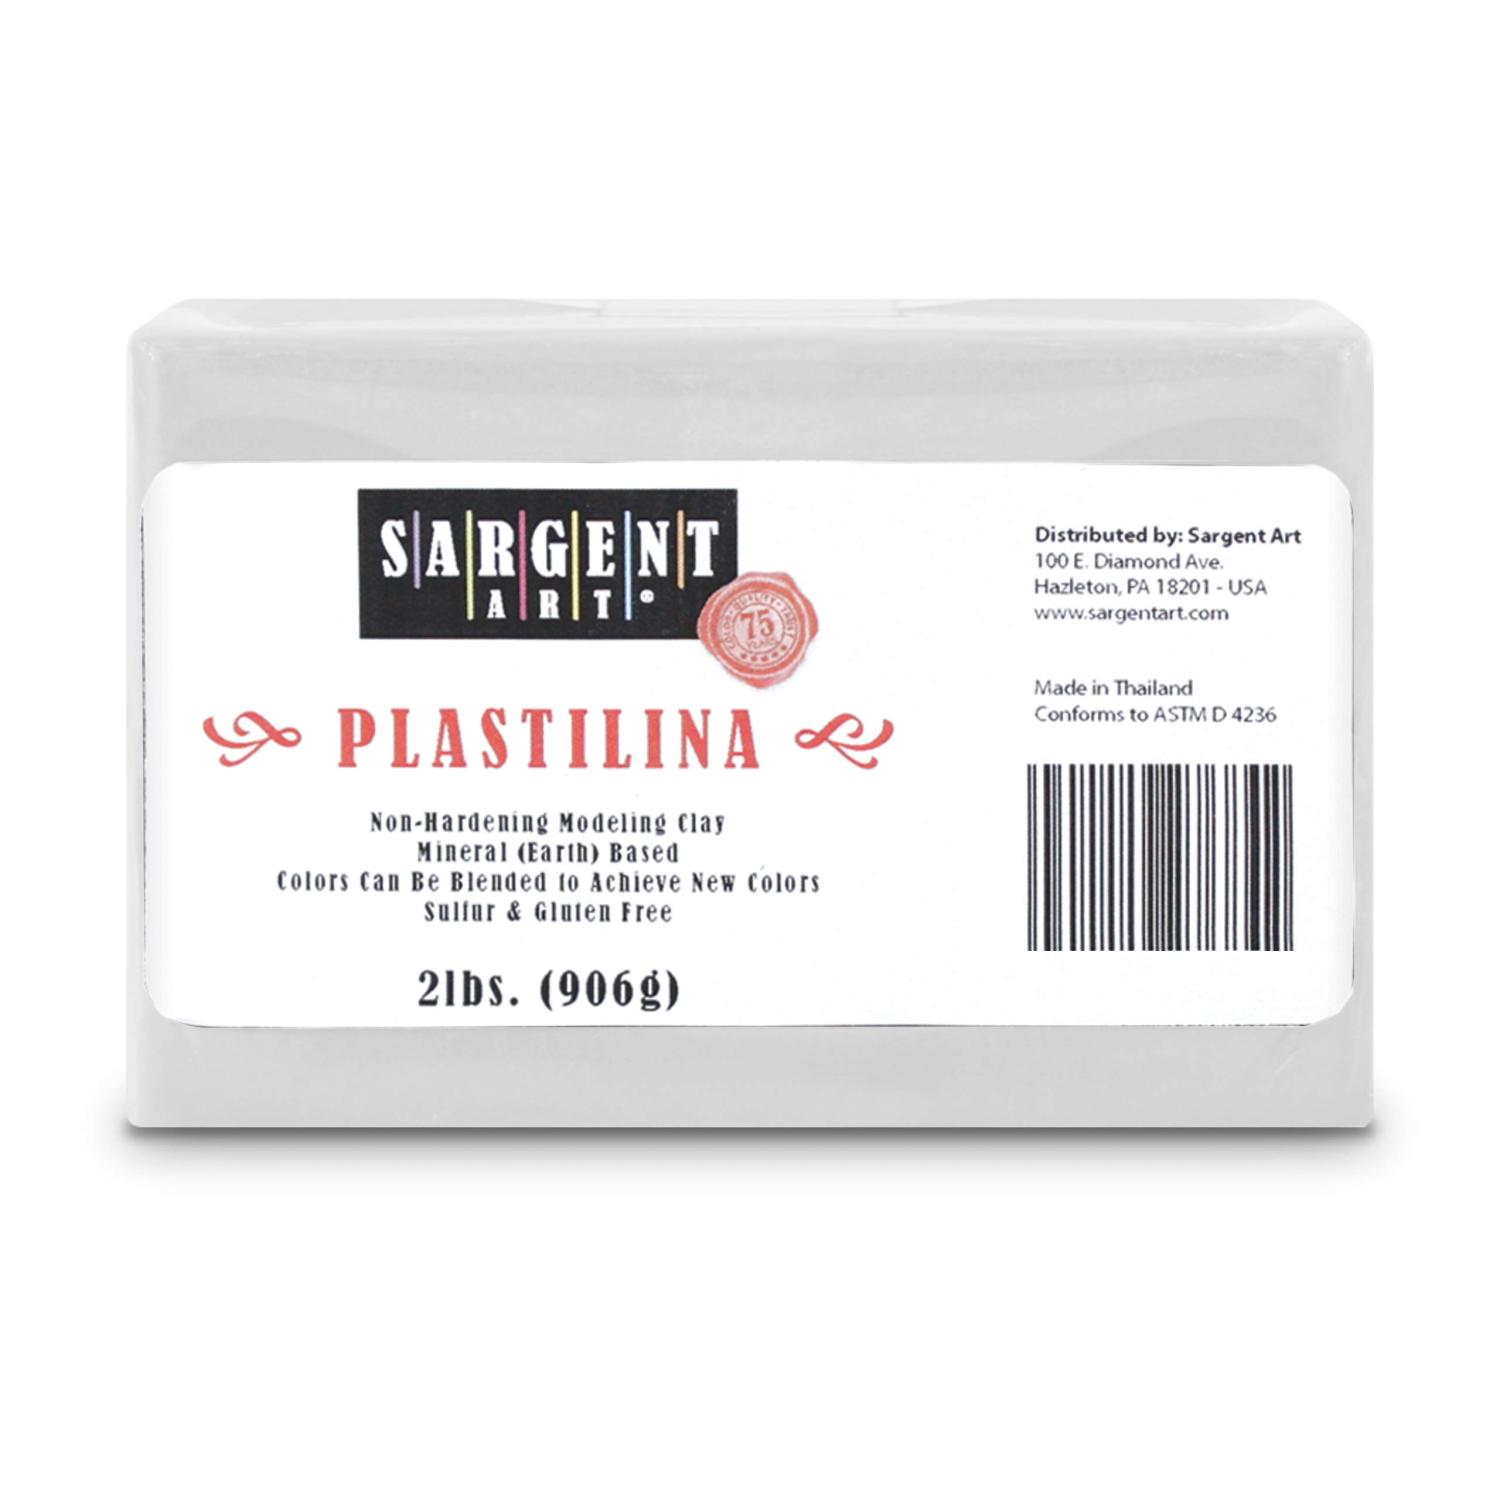 Sargent Art Plastilina Modeling Clay White 2 Pound Non-Hardening Long  Lasting & Non-Toxic Great for Kids Beginners and Artists